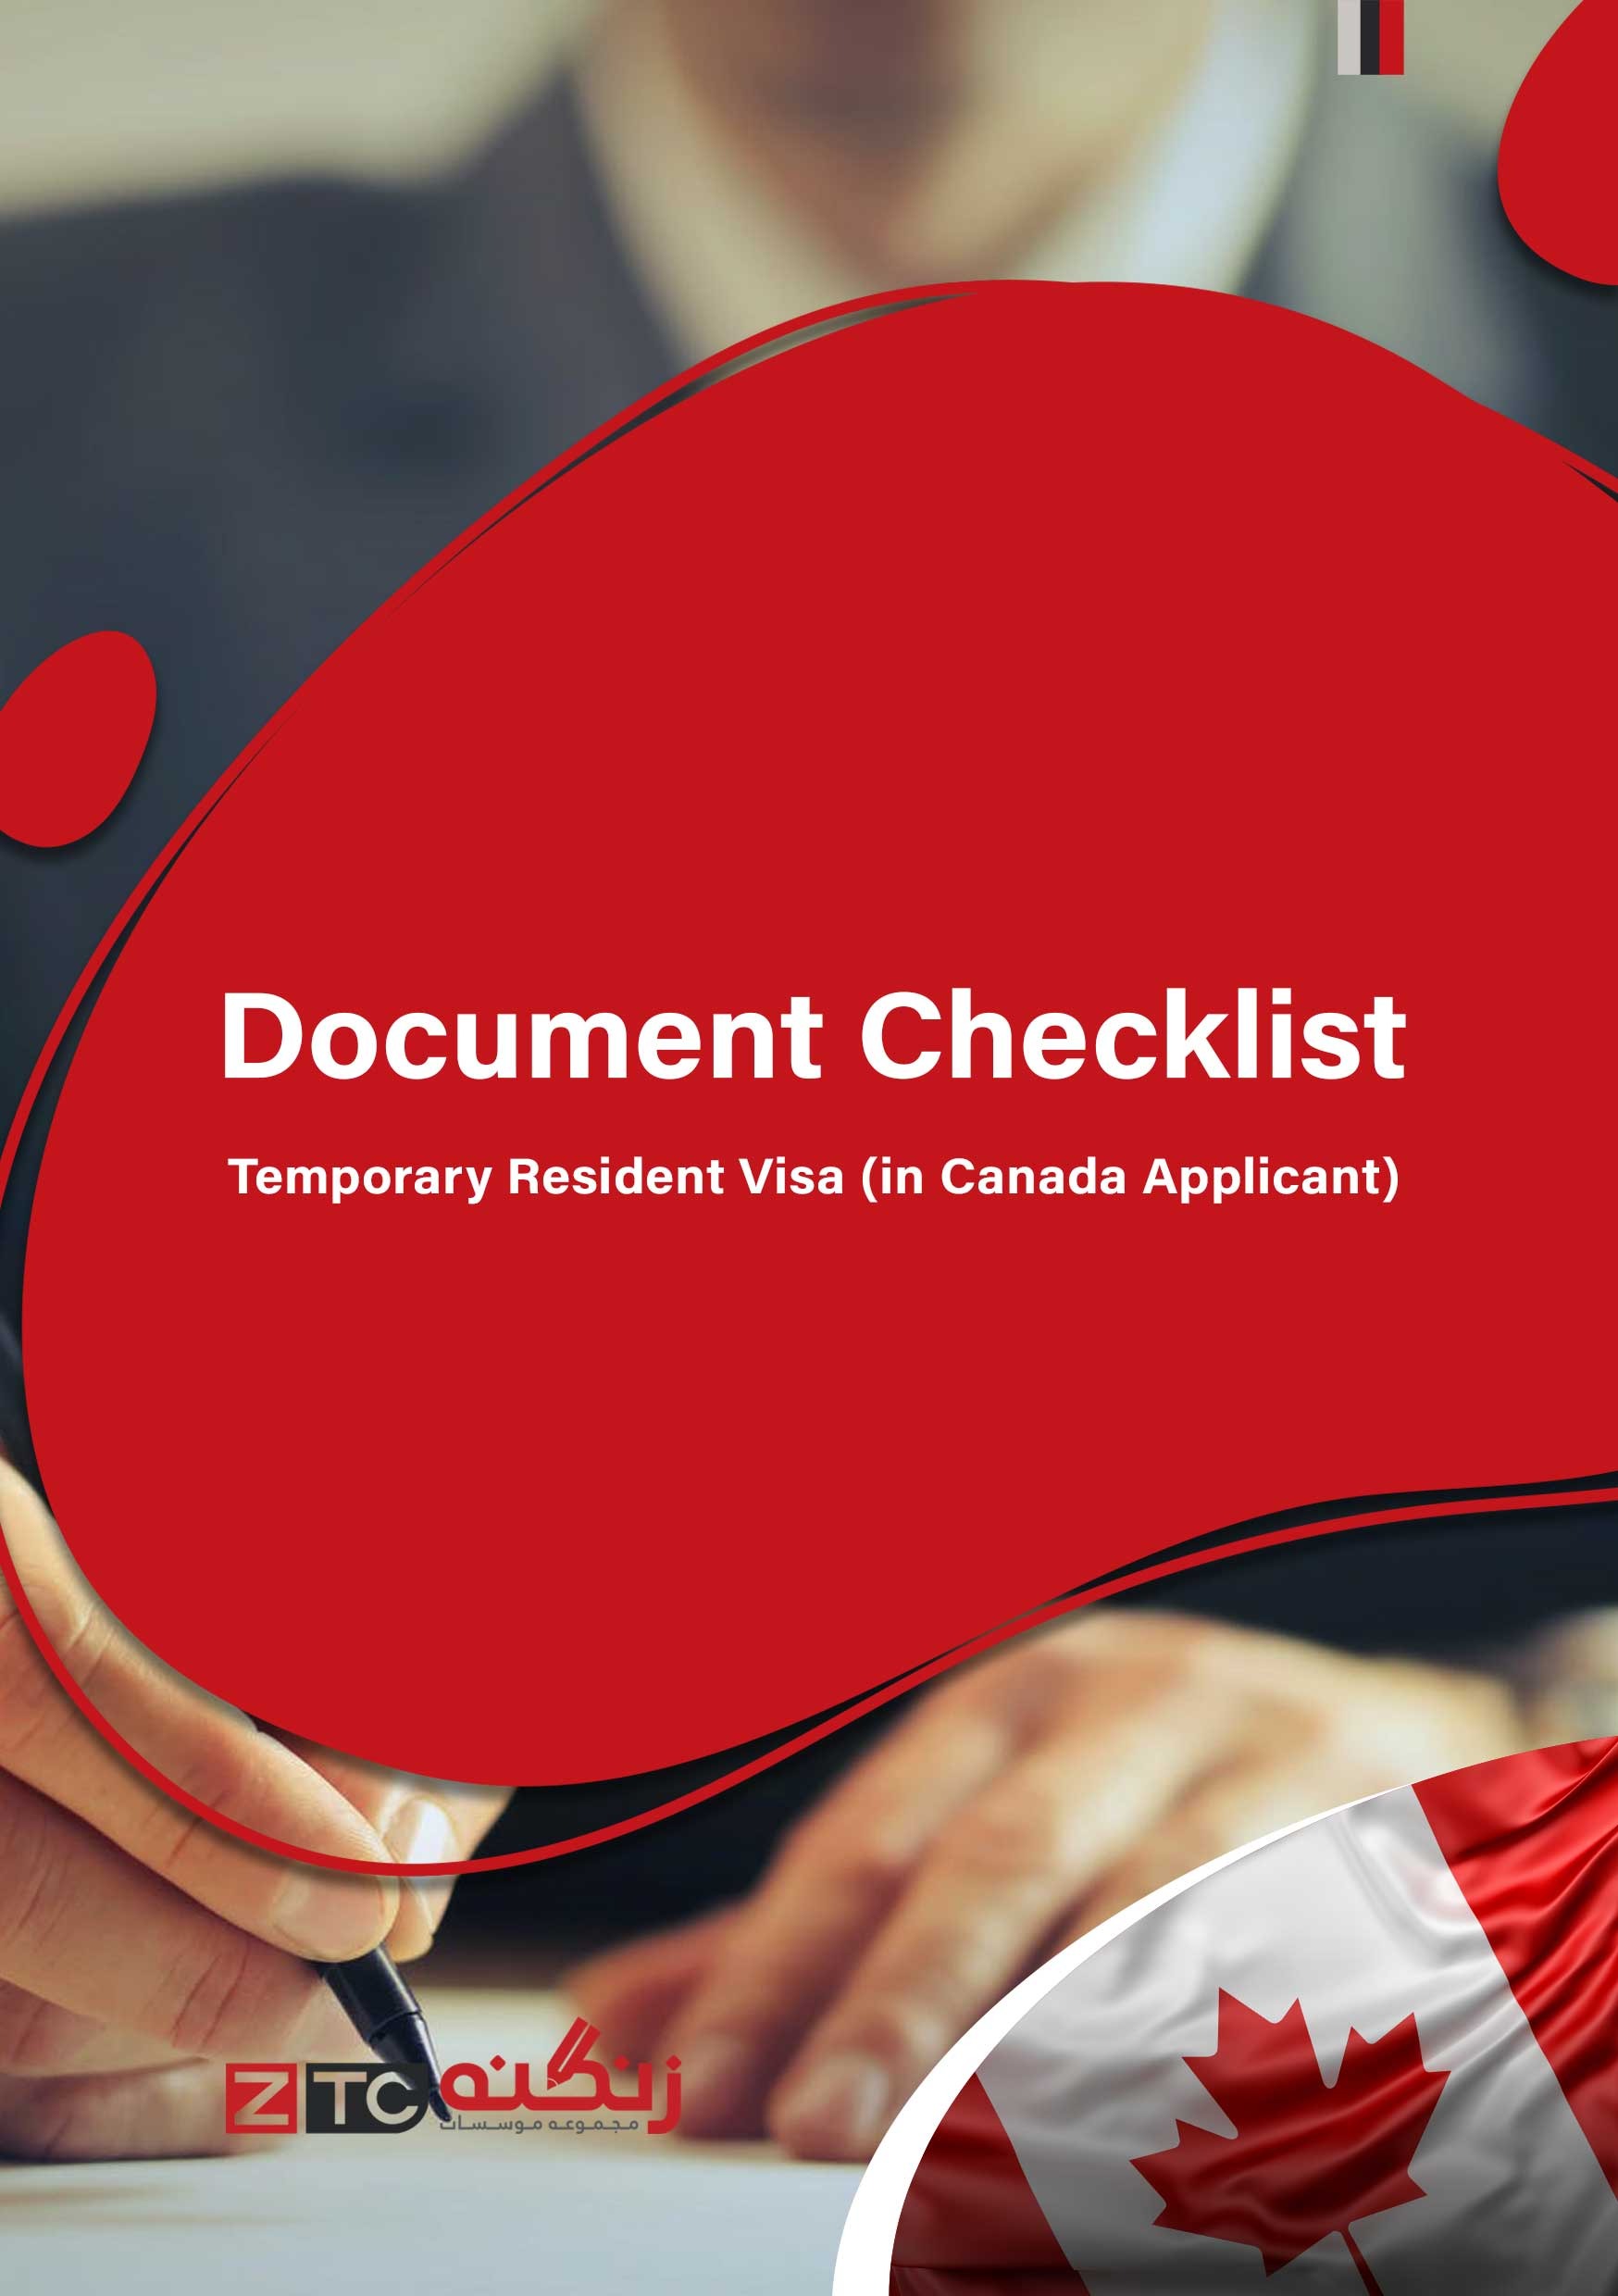 Document Checklist Temporary Resident Visa (in Canada Applicant)